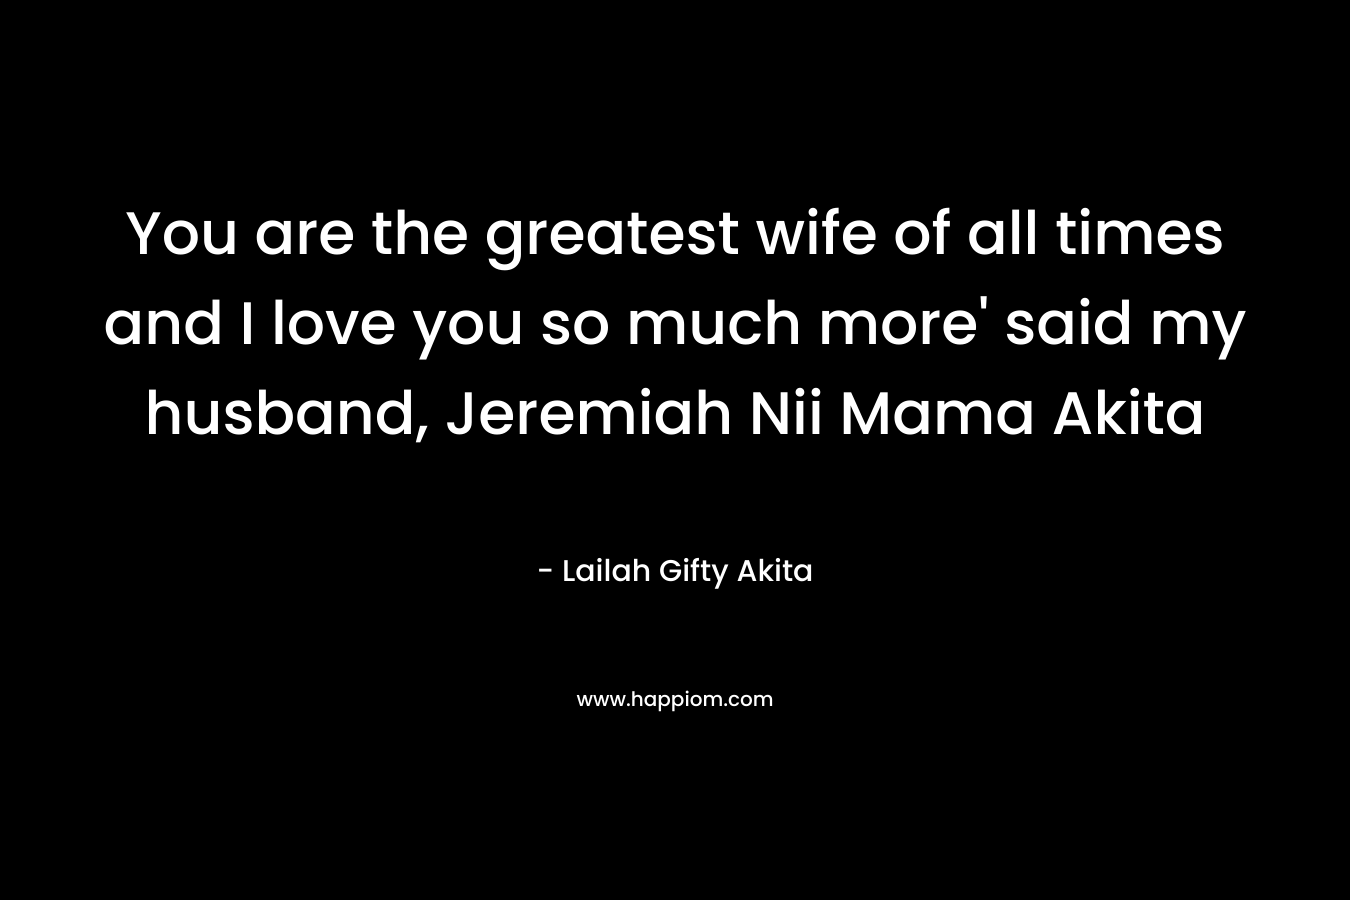 You are the greatest wife of all times and I love you so much more' said my husband, Jeremiah Nii Mama Akita